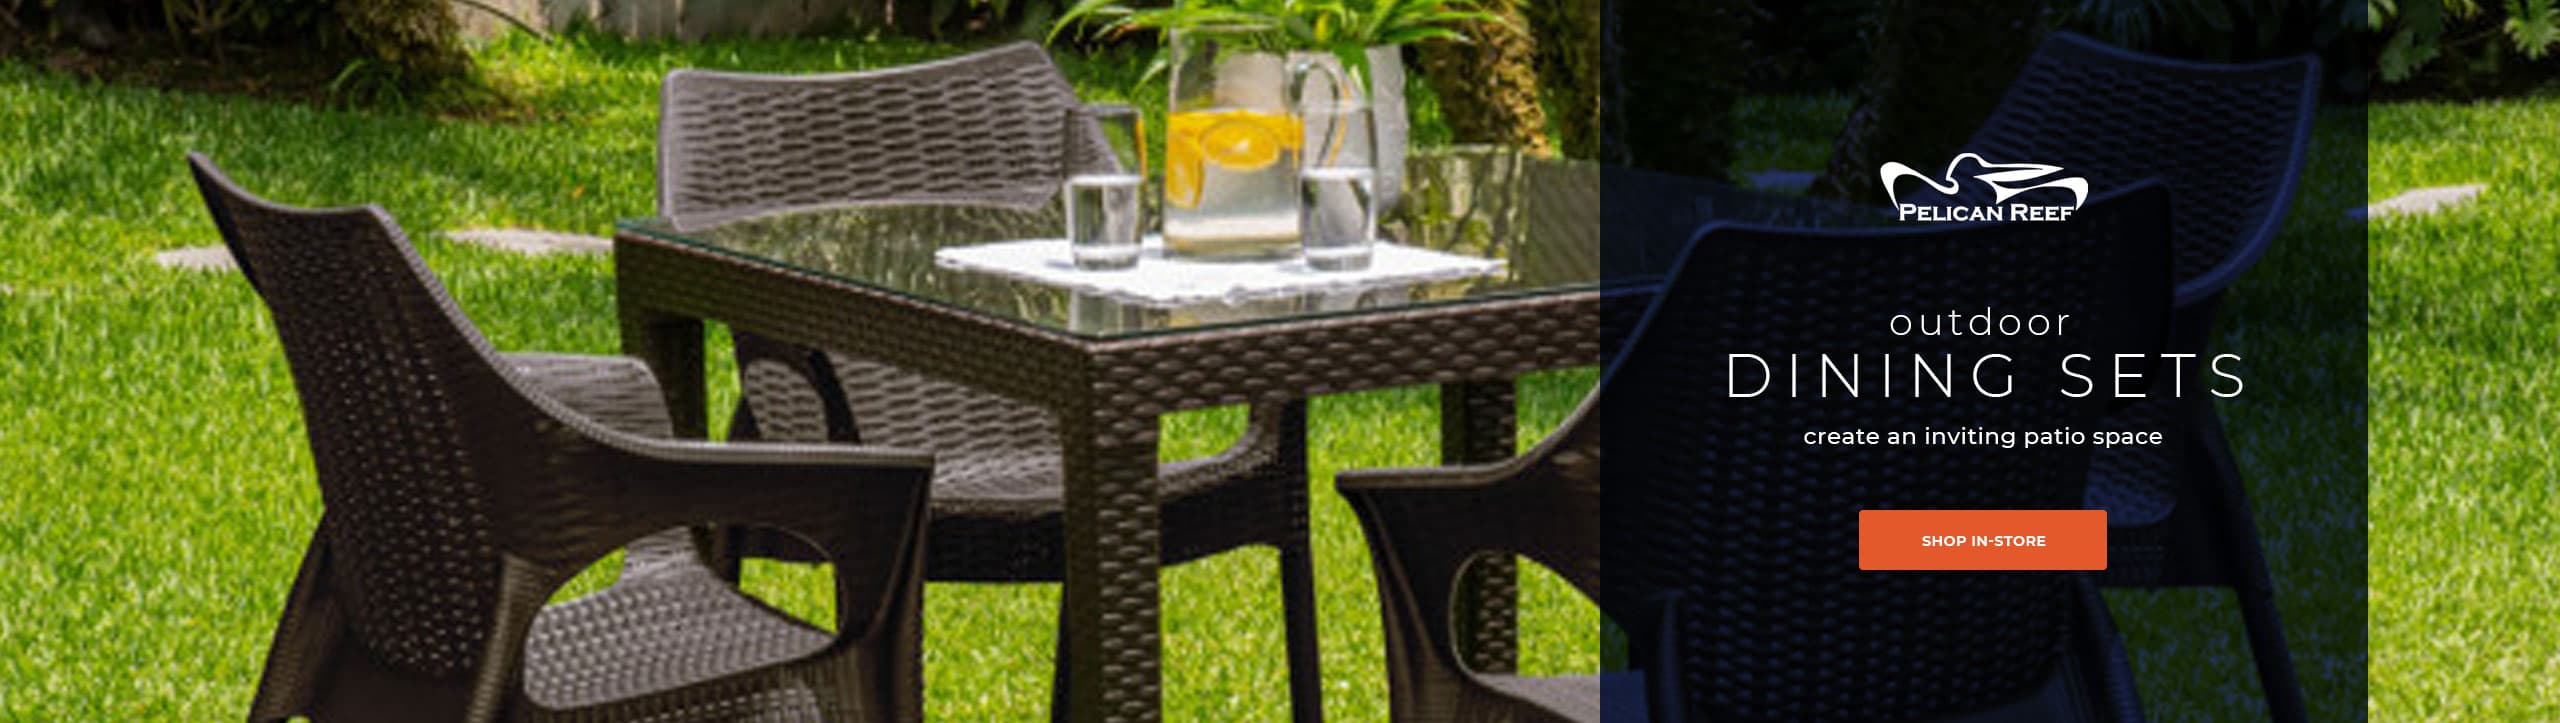 Outdoor Dining Sets by Pelican Reef - Shop Instore